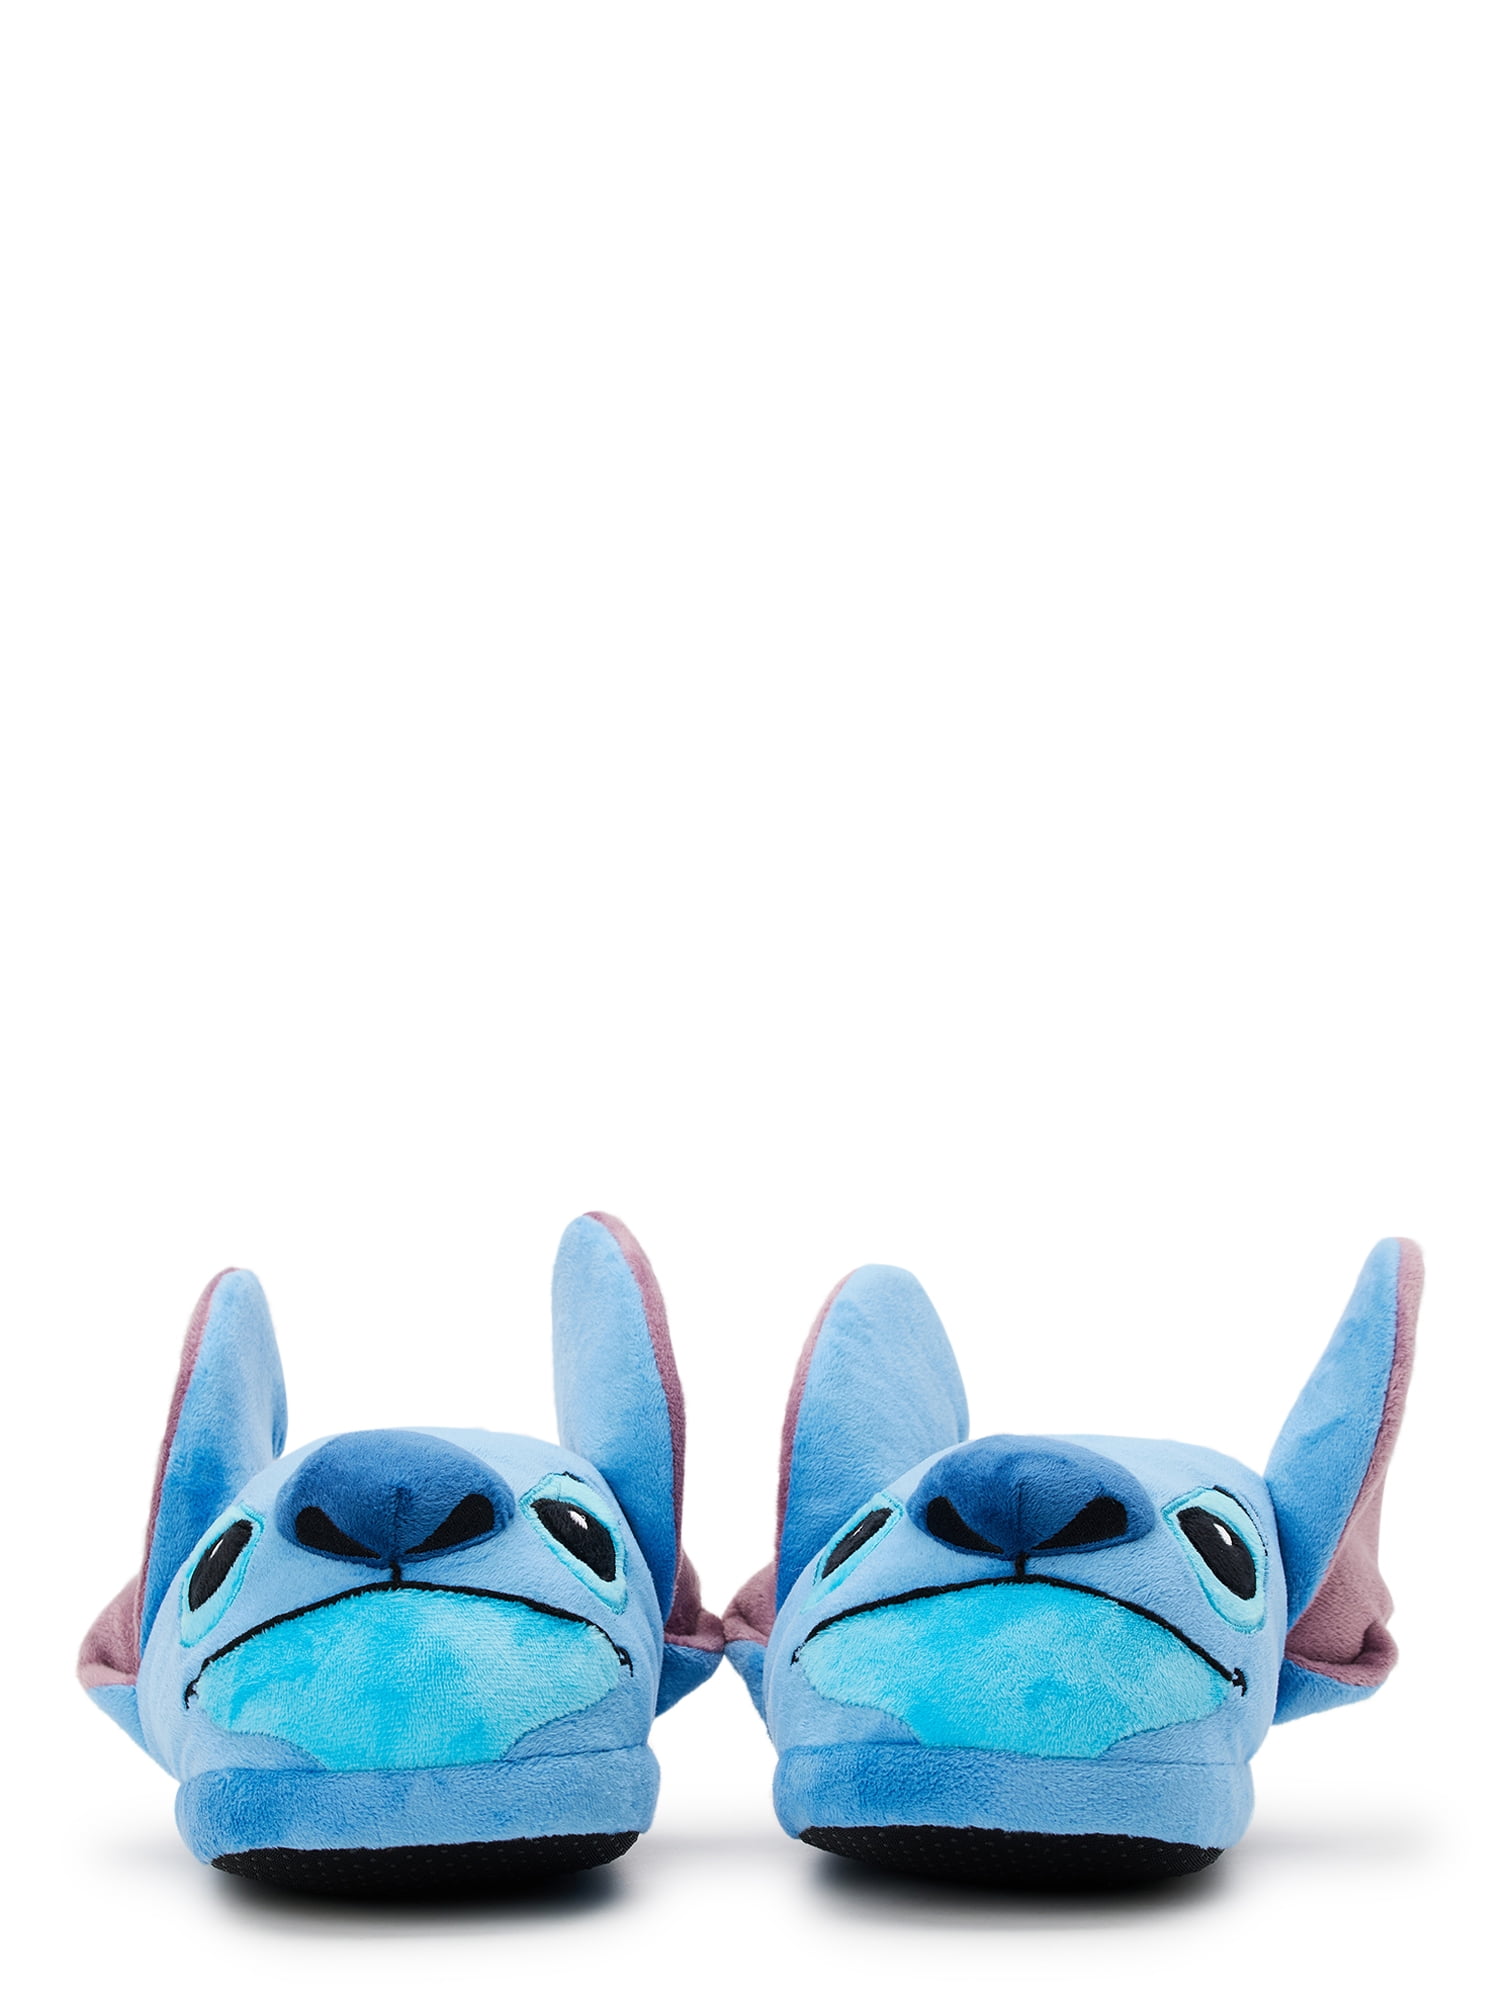 Disney Store Stitch Slippers For Adults | shopDisney